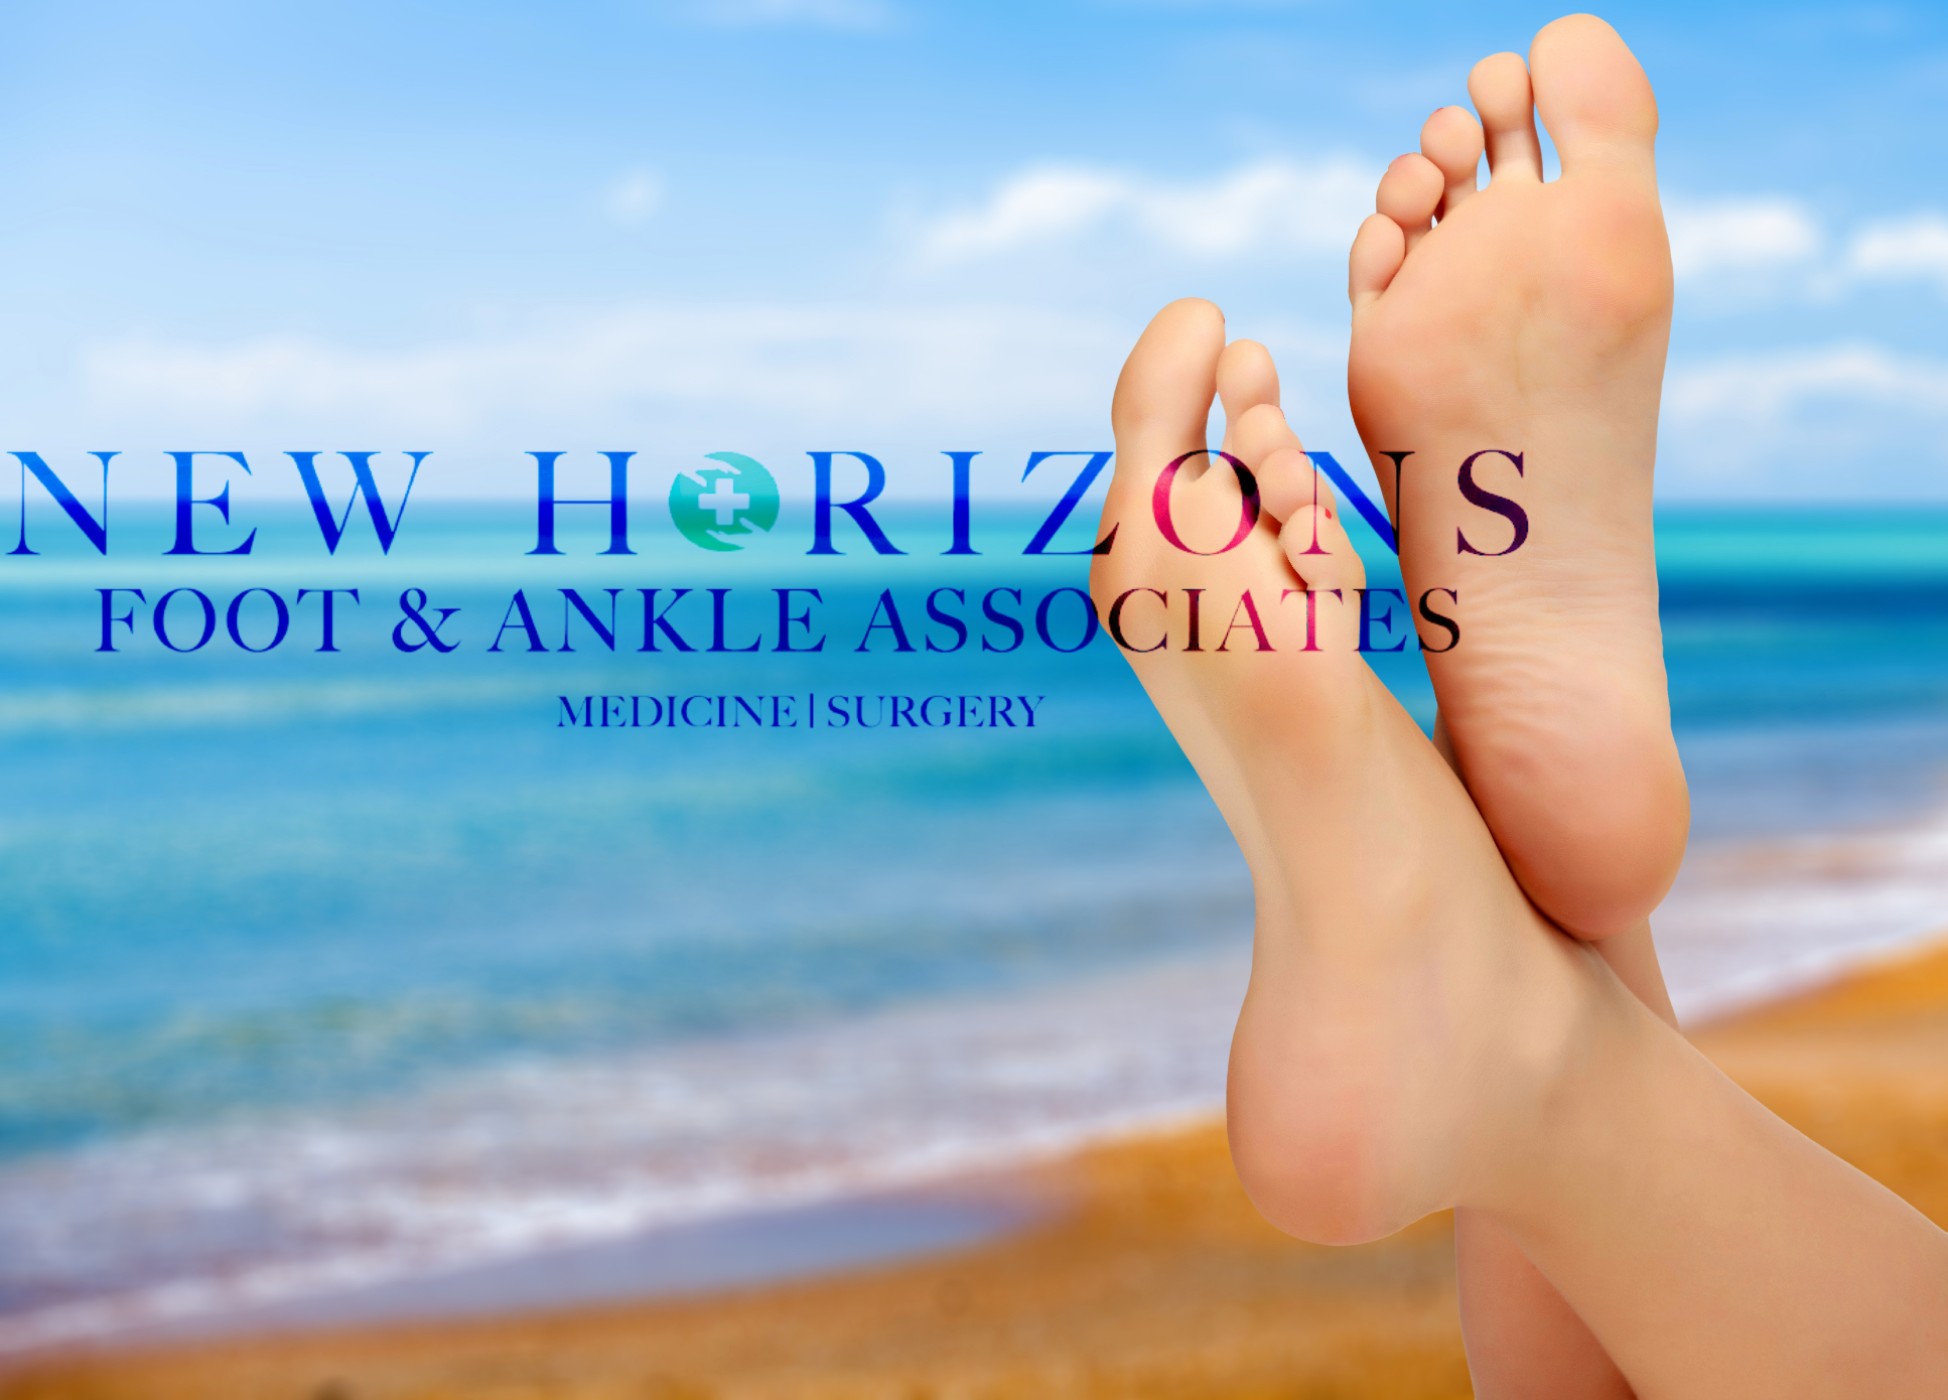 New Horizons Foot & Ankle